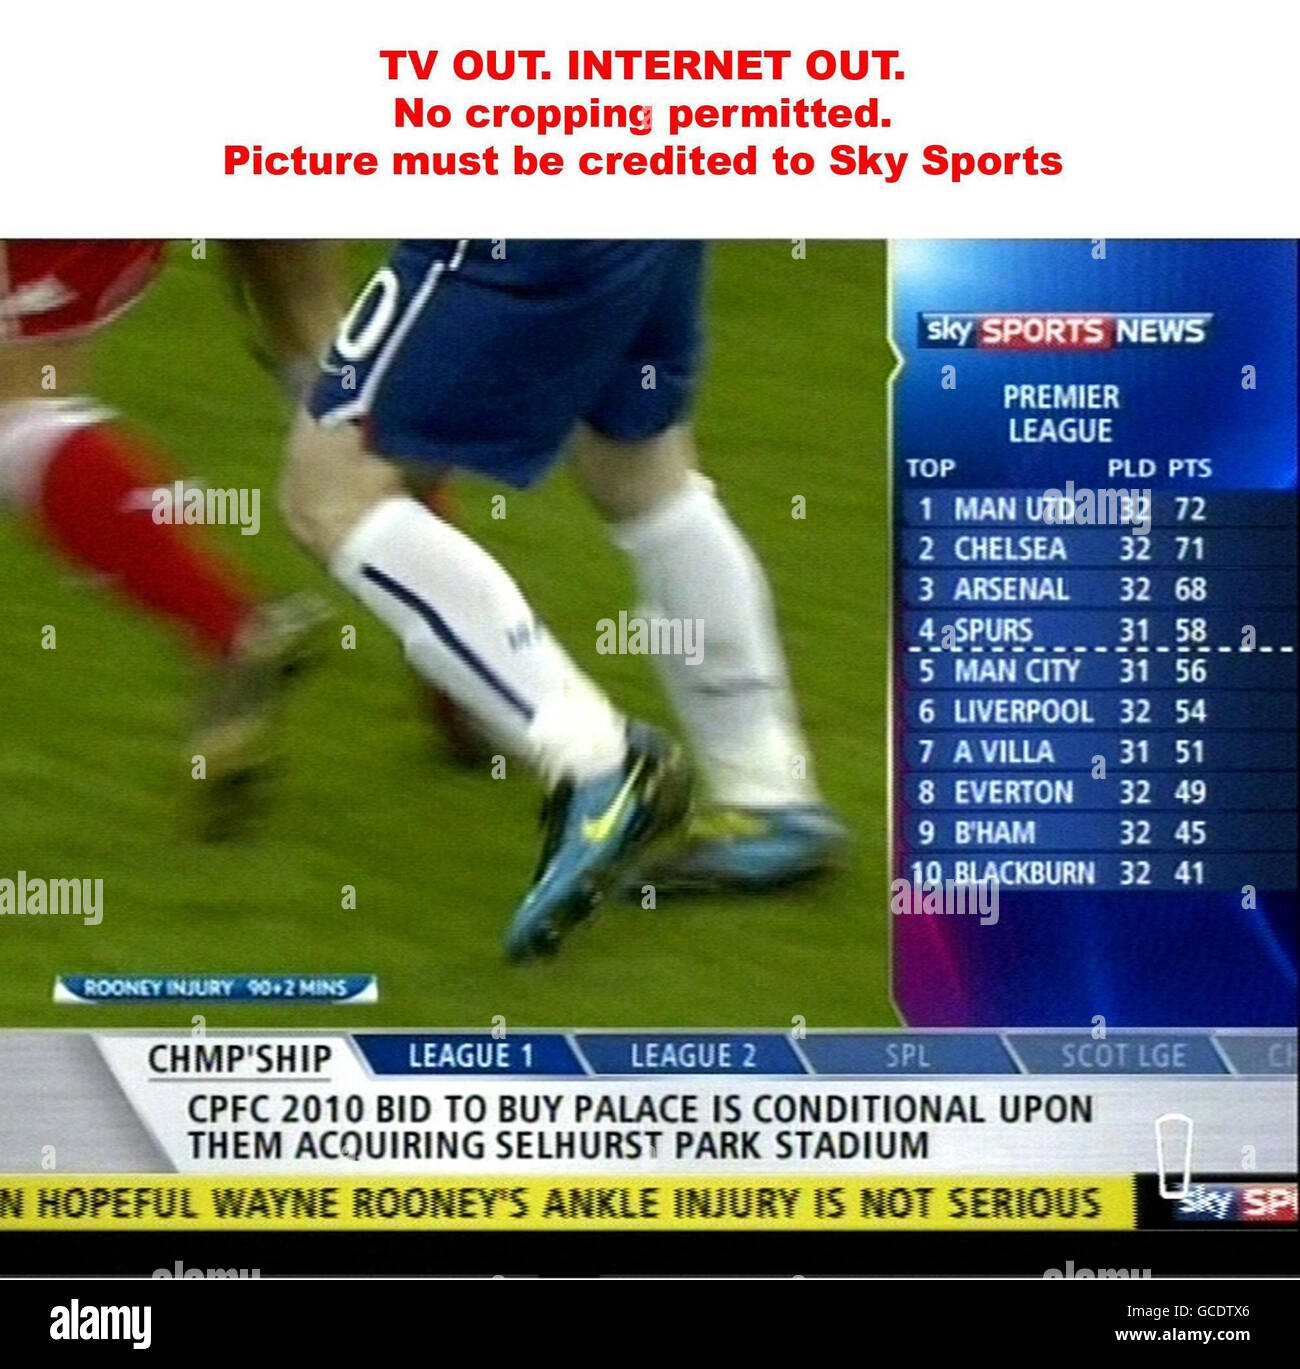 TV OUT. INTERNET OUT. No cropping permitted. Picture must be credited to Sky Sports. We are advised that videograbs should not be used more than 48 hours after the time of original transmission, without the consent of the copyright holder. Video grab taken from Sky Sports of Manchester United Wayne Rooney appearing to twist his ankle during the Champions League, Quarter Final, First Leg match at the Allianz Arena, Munich, Germany. Stock Photo